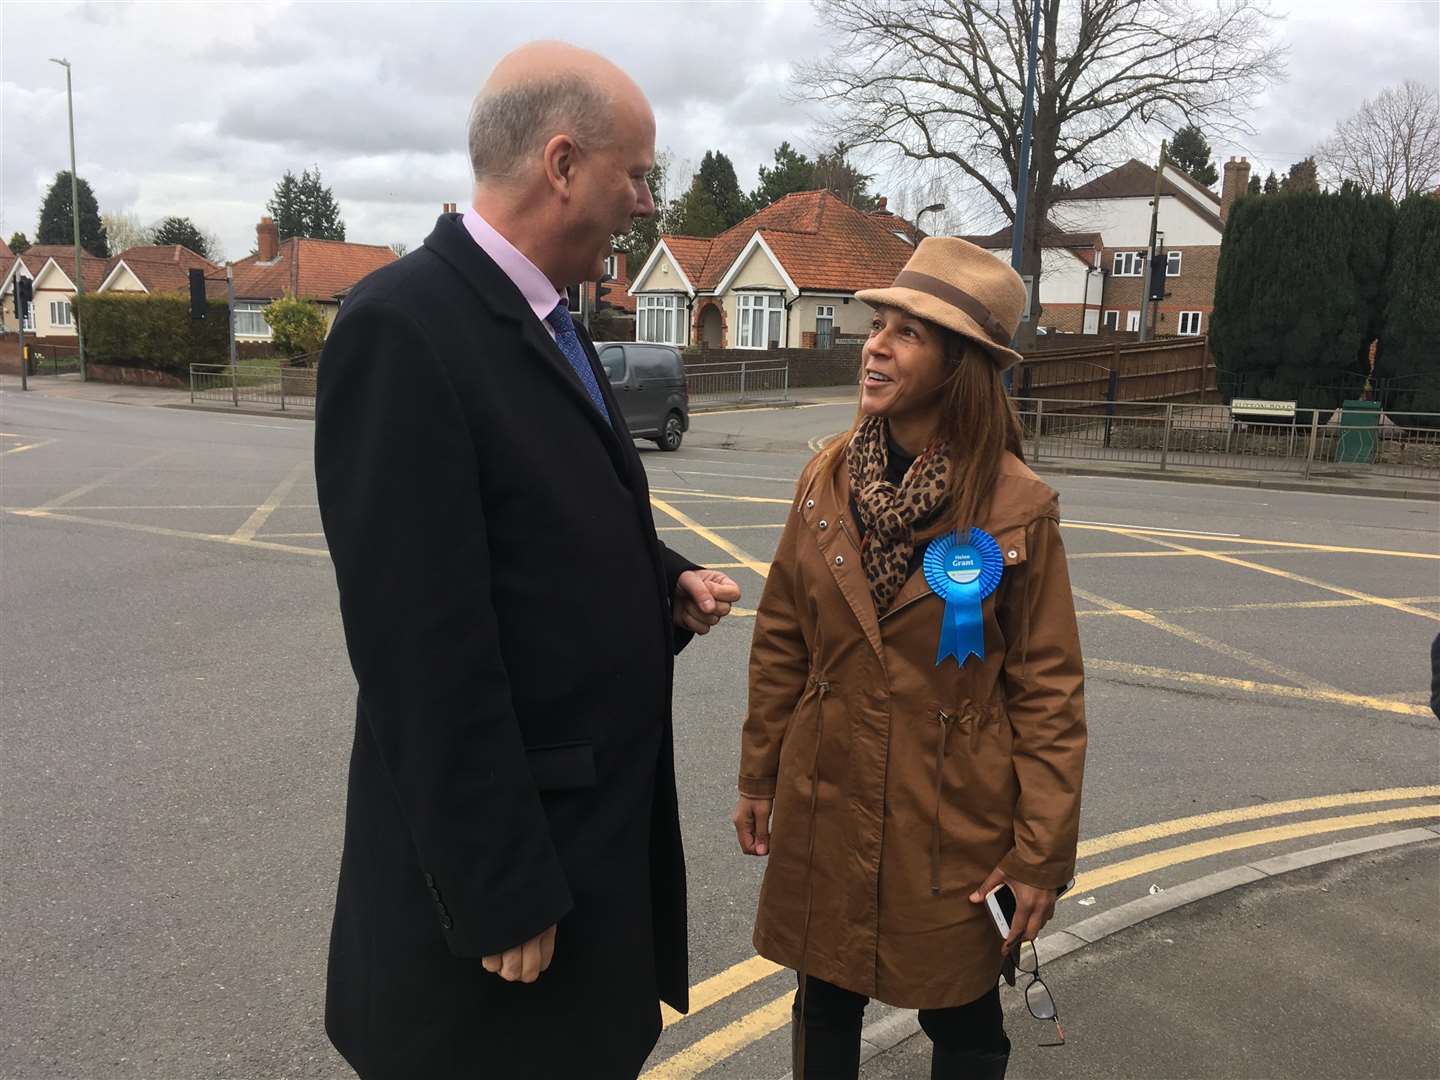 Chris Grayling met with Helen Grant and other Conservative campaigners in Maidstone. (1374809)